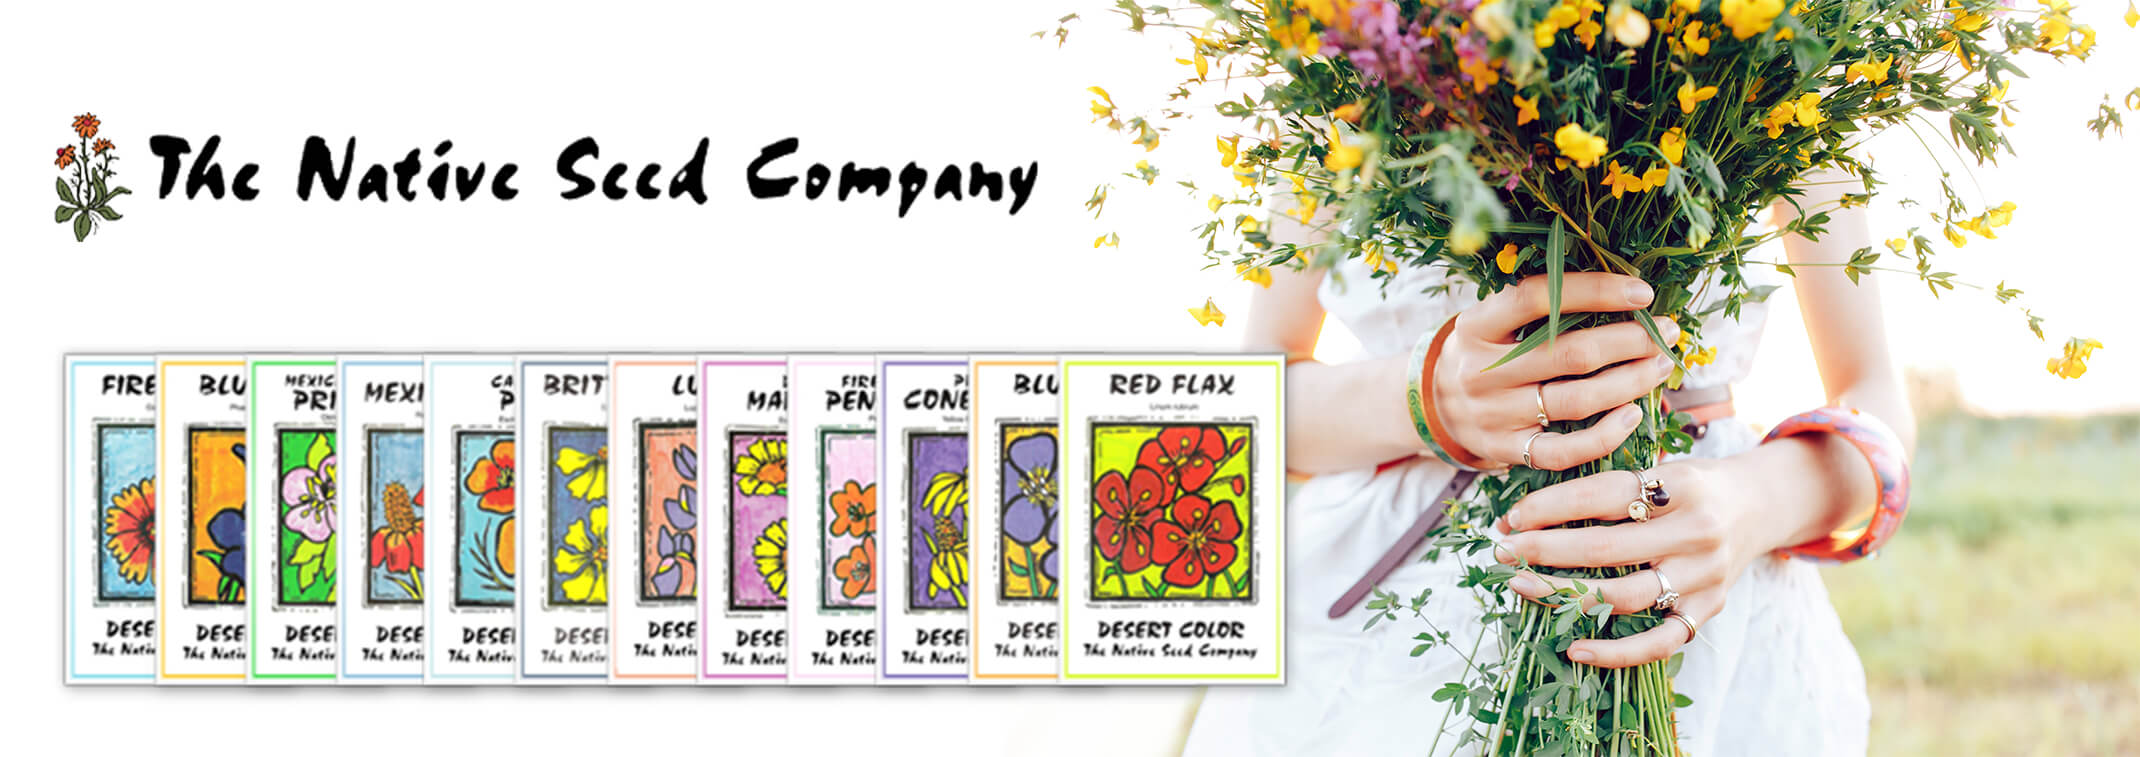 A collage with The Native Seed Company logo top left, a variety of flower seed packets below their logo, and a photo of a woman in a white dress holding a bouquet of wildflowers on the right